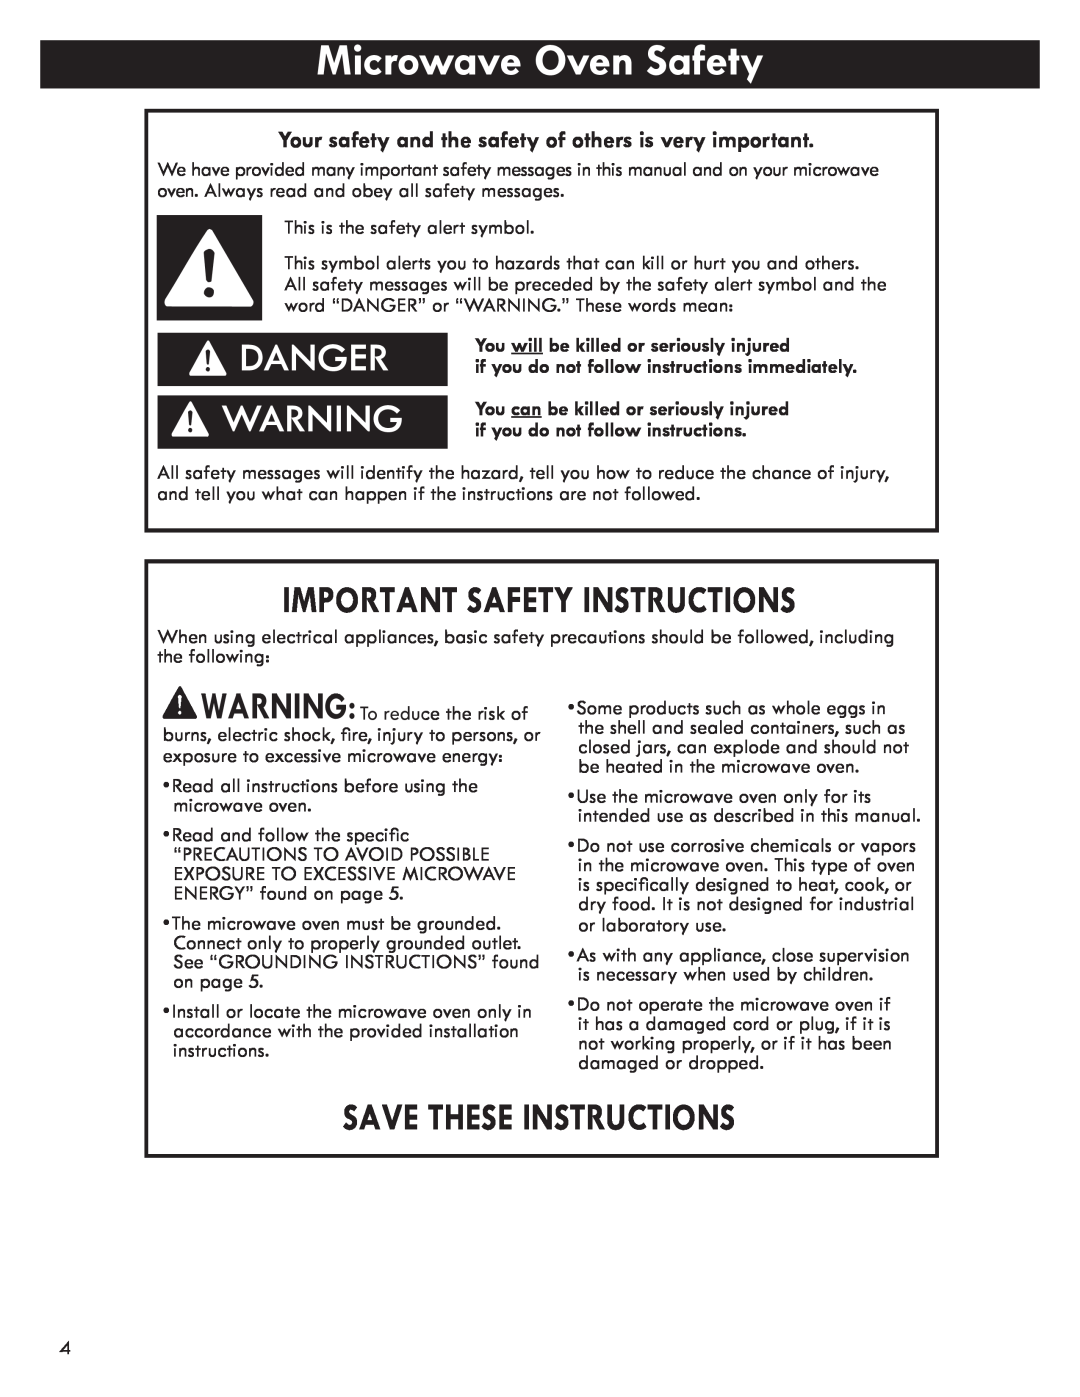 Kenmore 721.8502 manual Microwave Oven Safety, Danger, Important Safety Instructions, Save These Instructions 